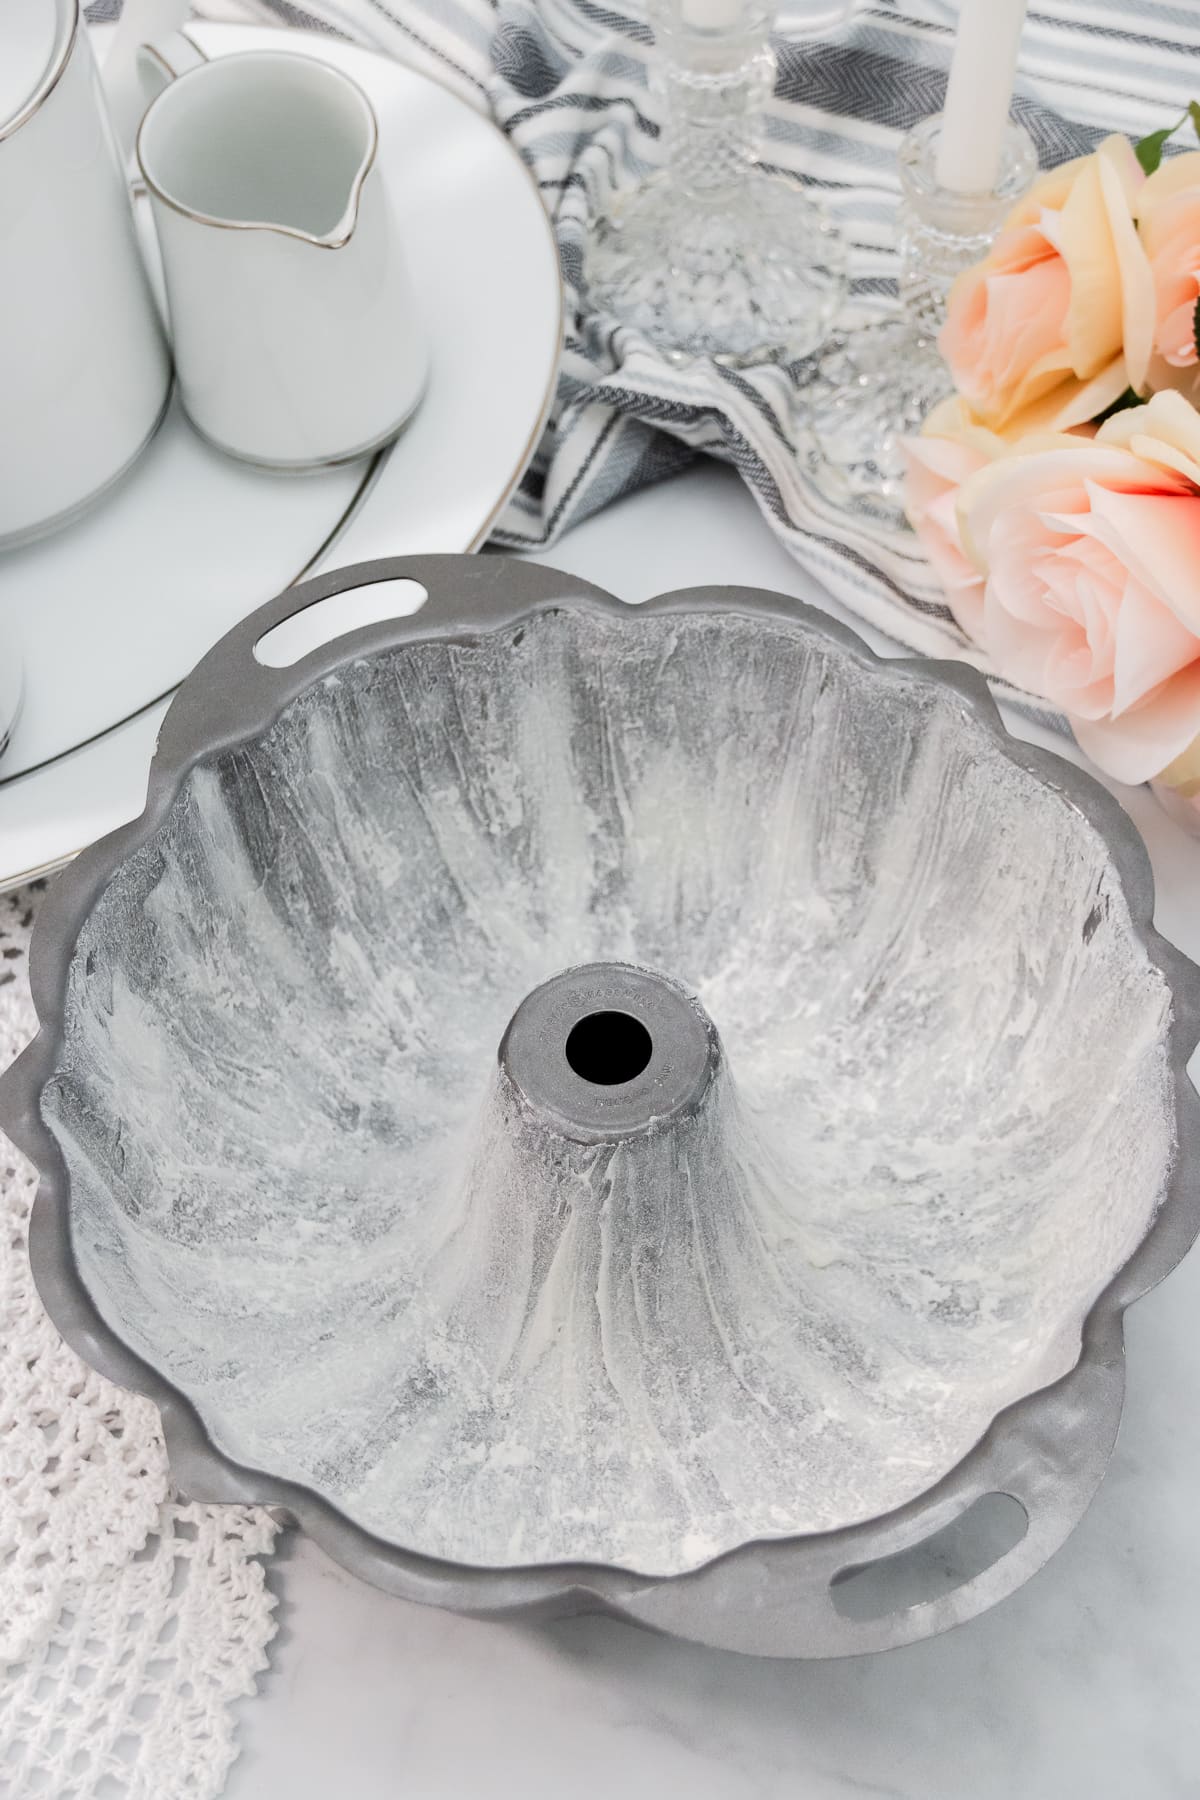 Large bundt pan greased and floured.